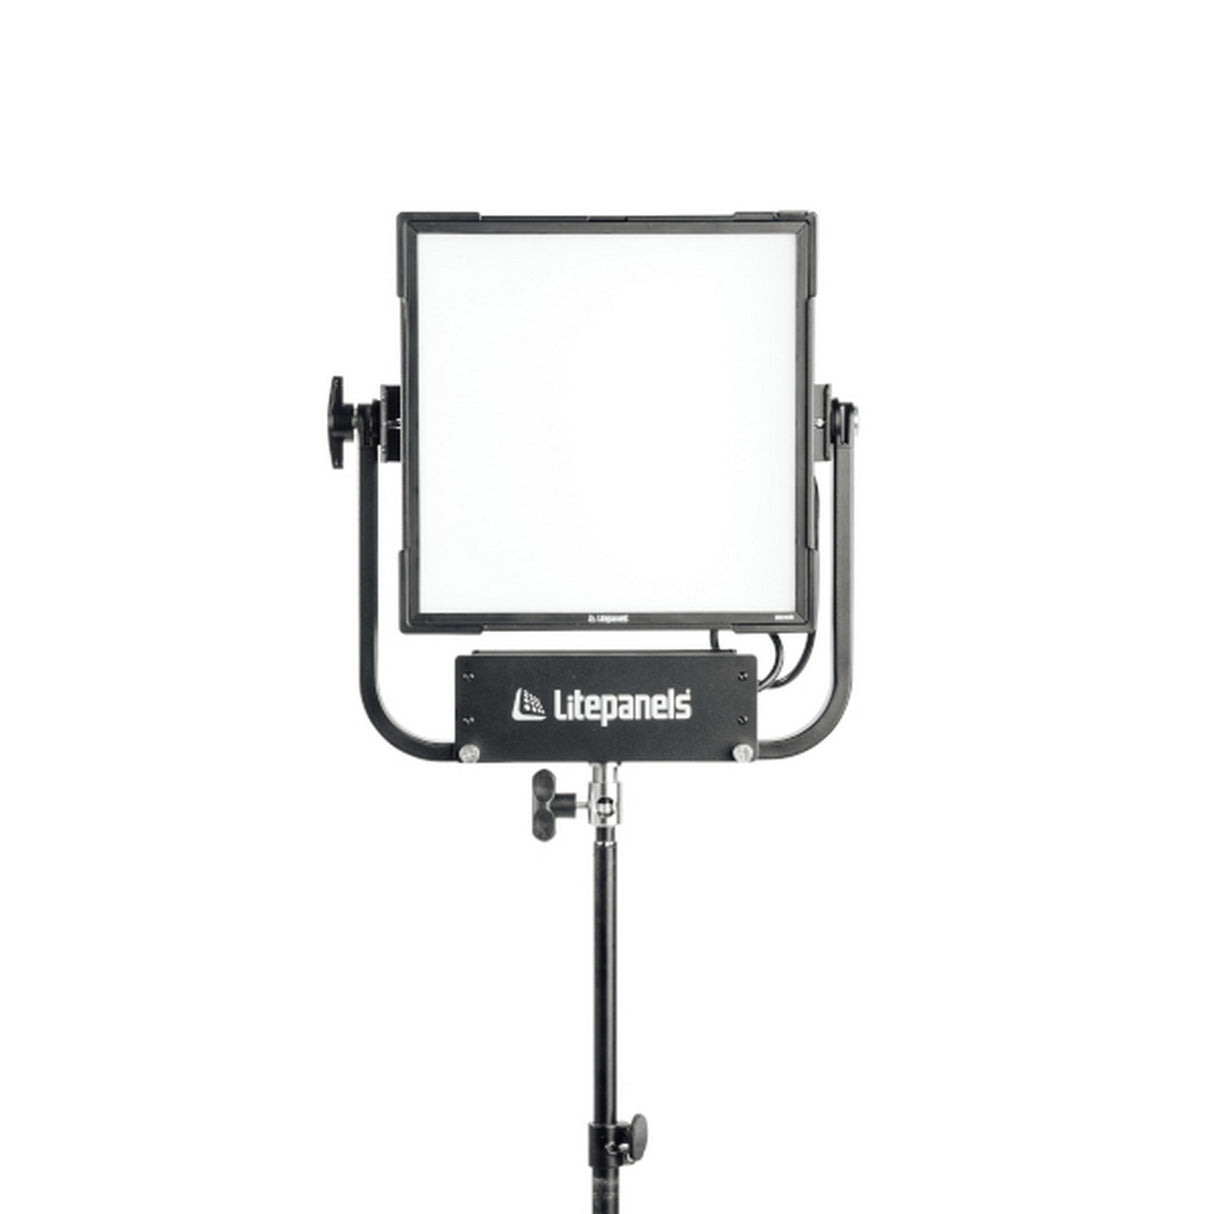 Litepanels 945-1411 Gemini 1 x 1 Soft Panel with Pole Op Yoke, Bare Ends Power Cable